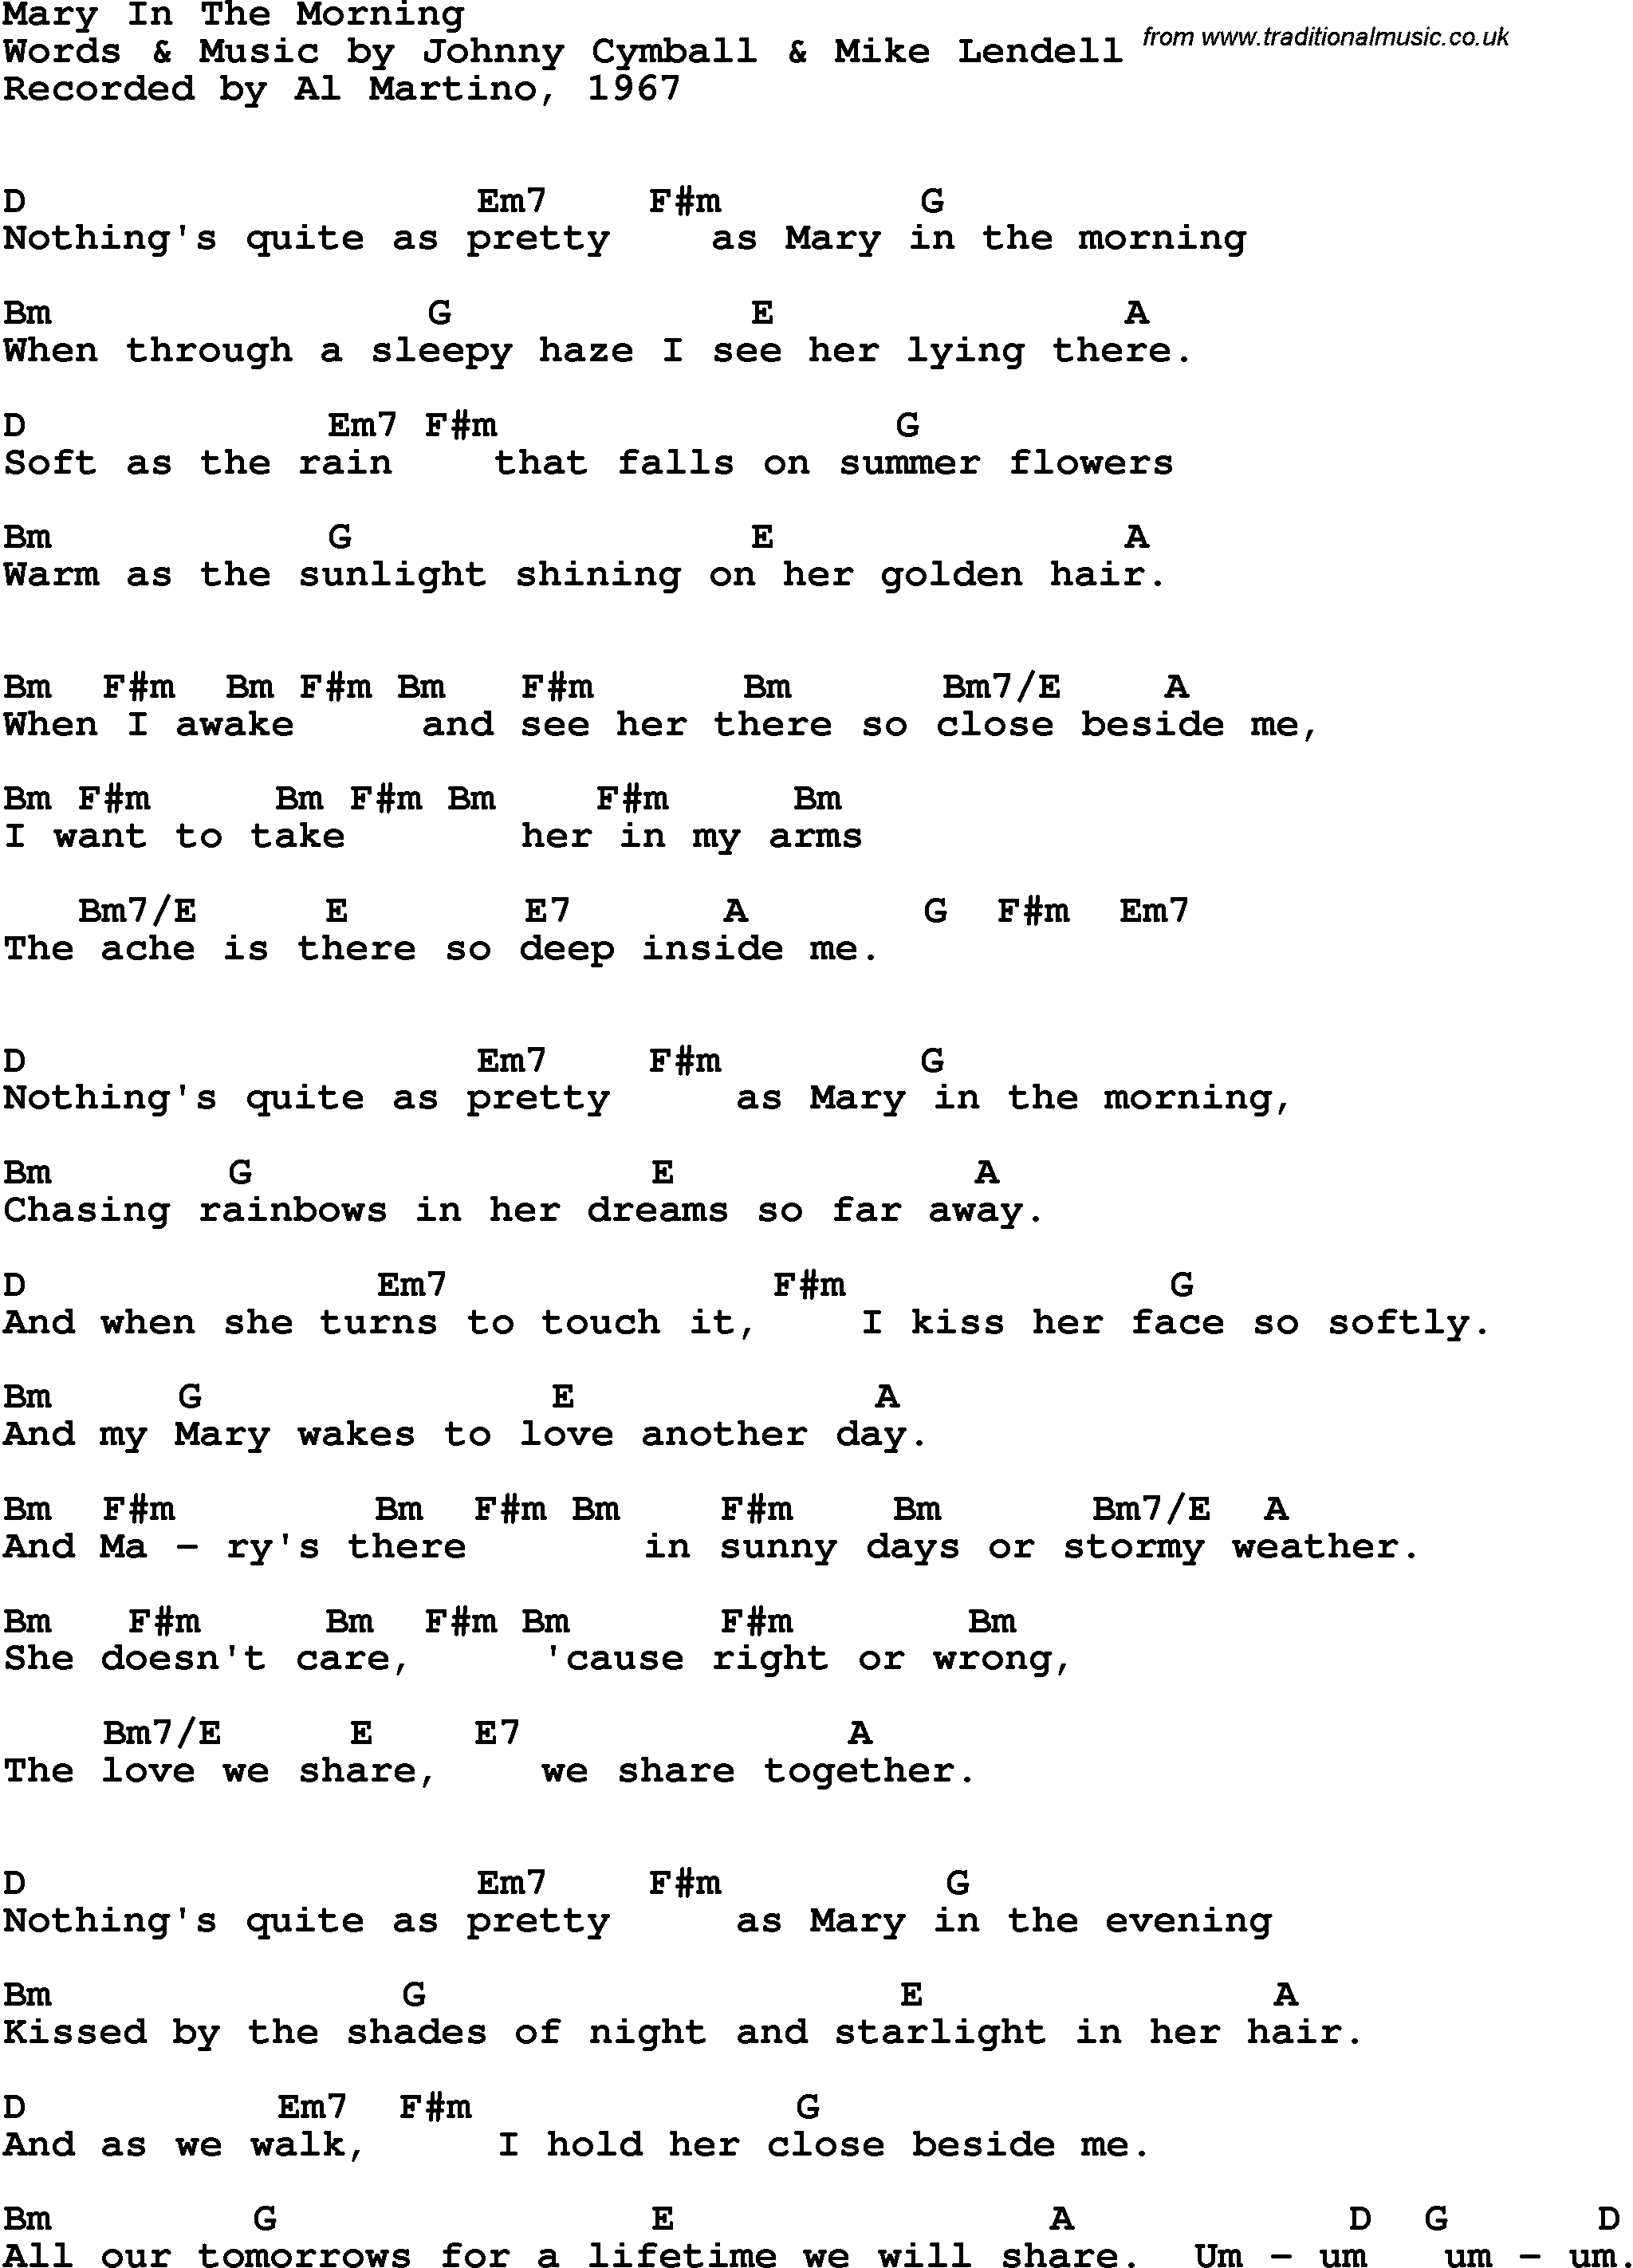 Song Lyrics with guitar chords for Mary In The Morning - Al Martino, 1967